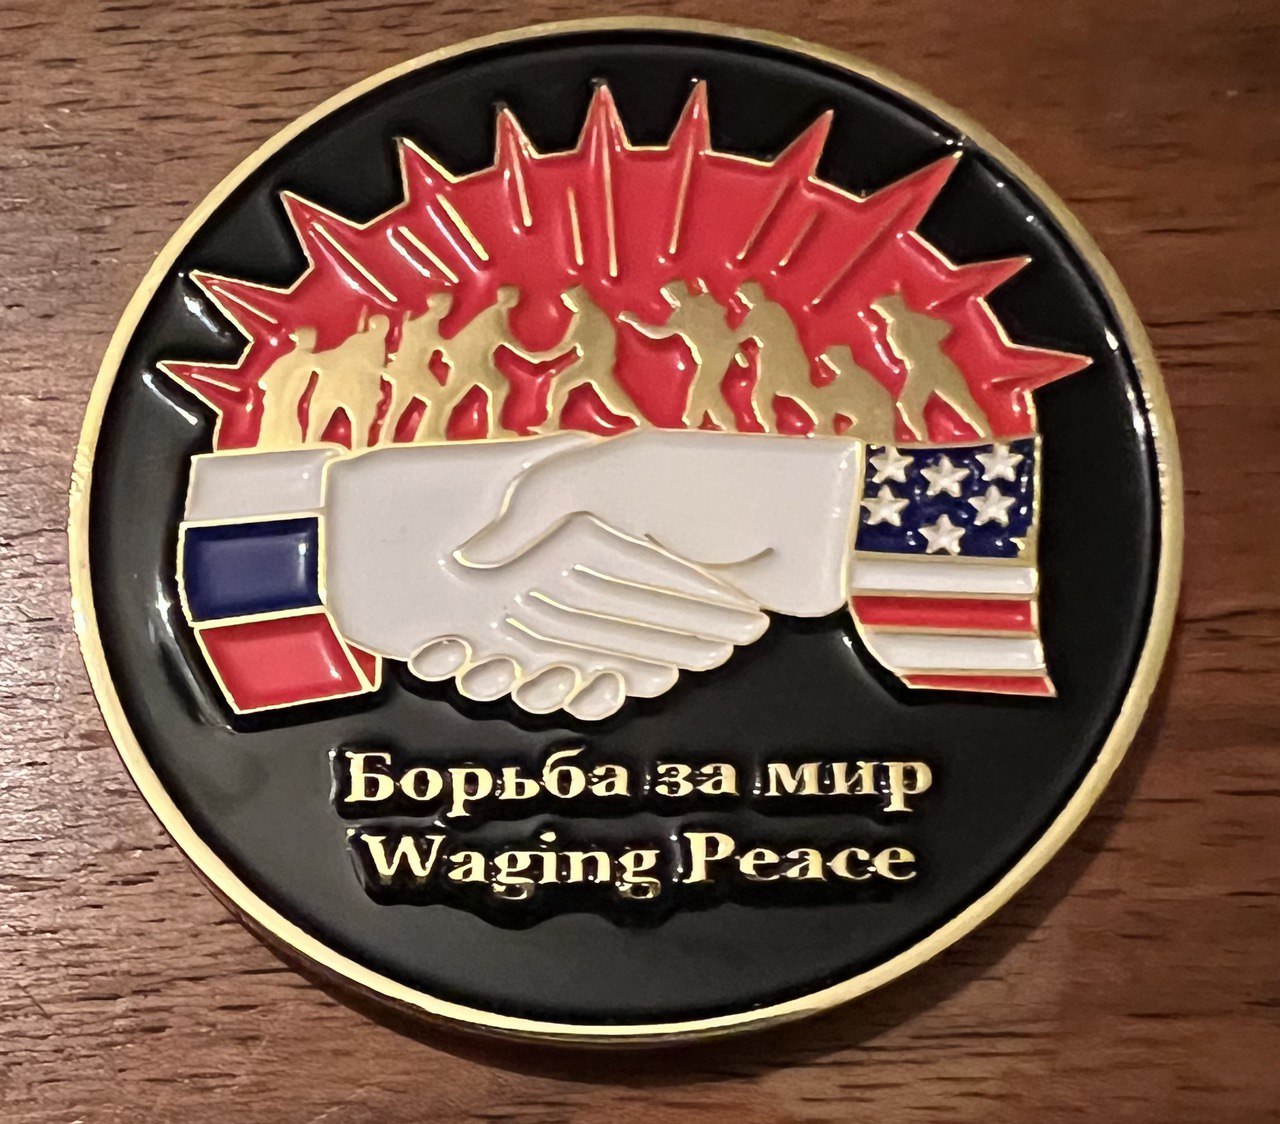 The Waging Peace Trilogy Challenge Coin Set